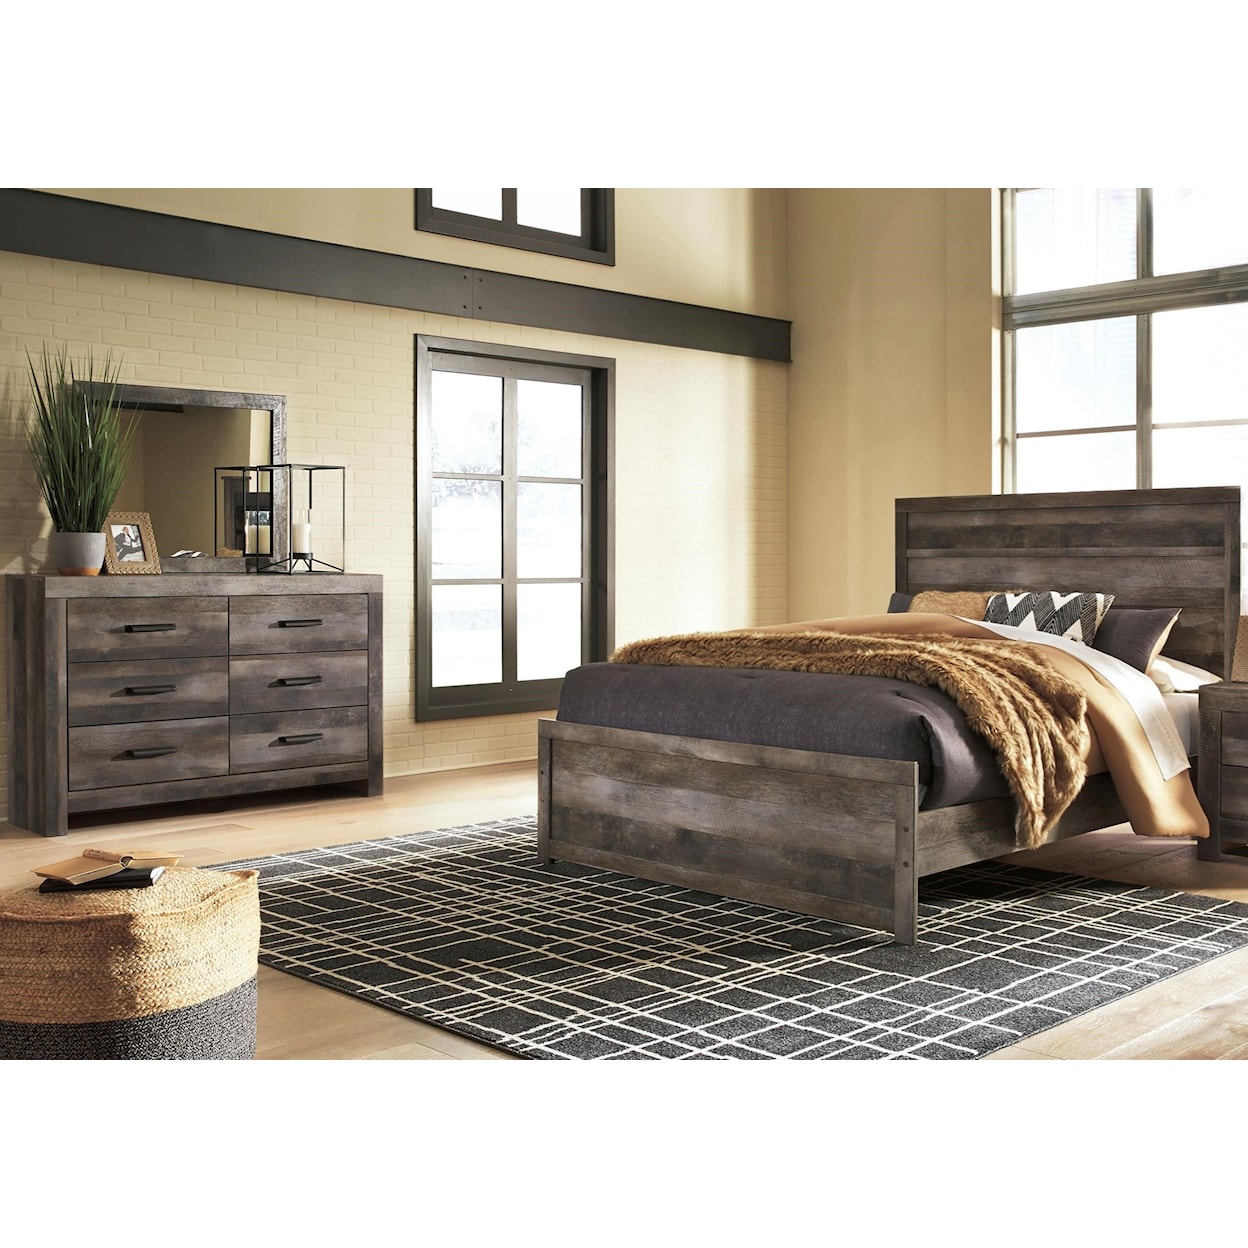 Signature Design by Ashley Wynnlow 5pc Queen Bedroom Group